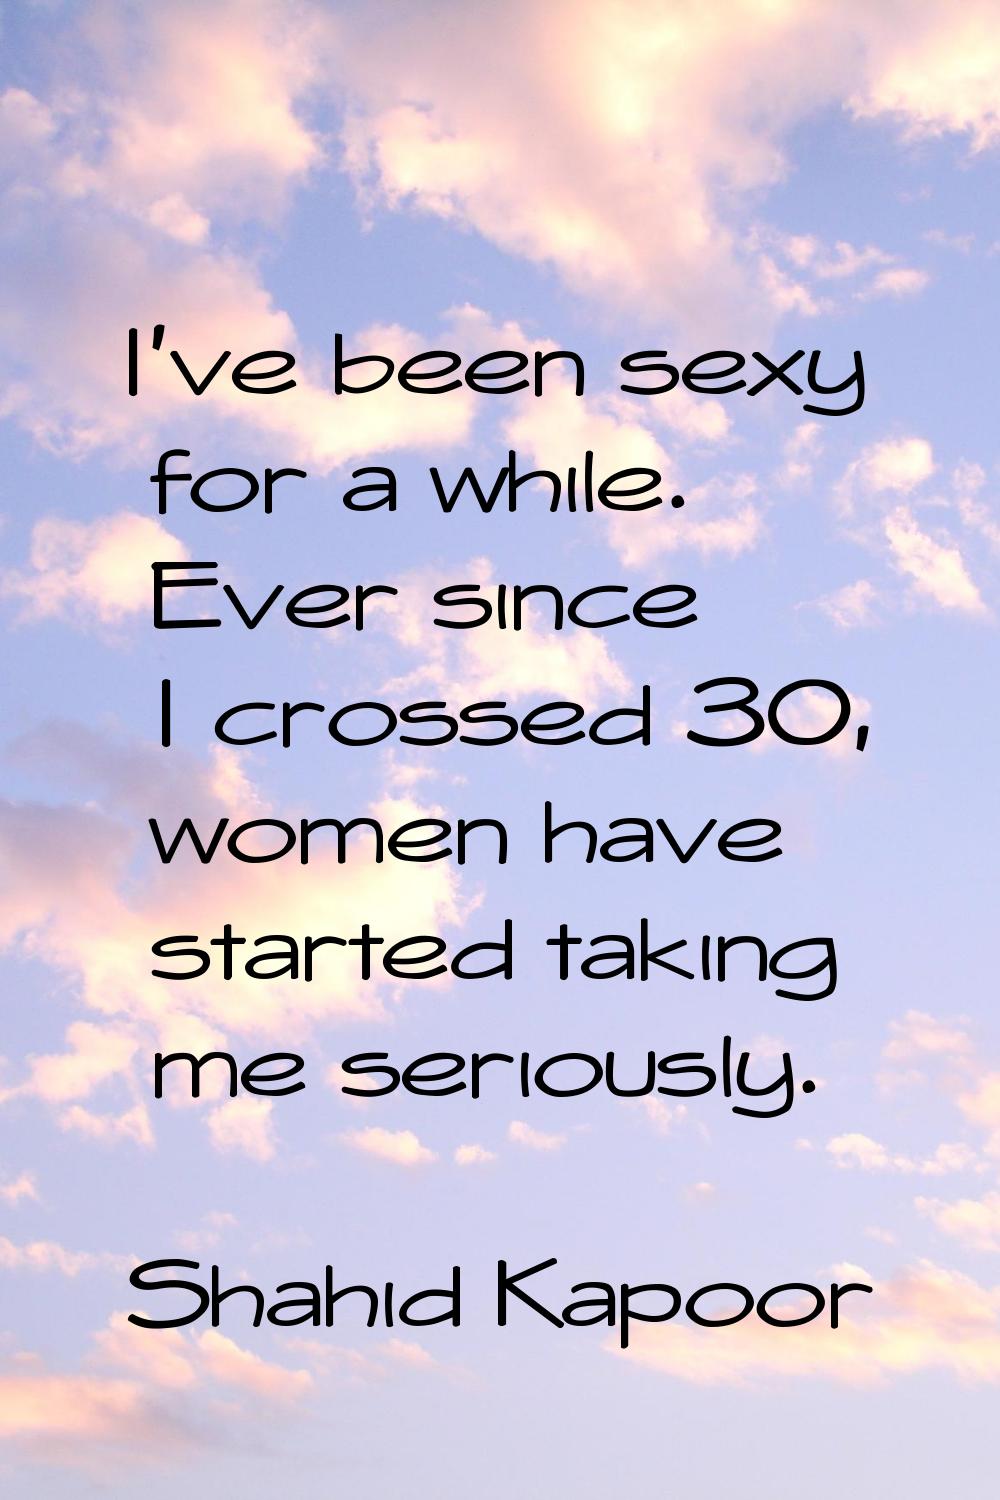 I've been sexy for a while. Ever since I crossed 30, women have started taking me seriously.